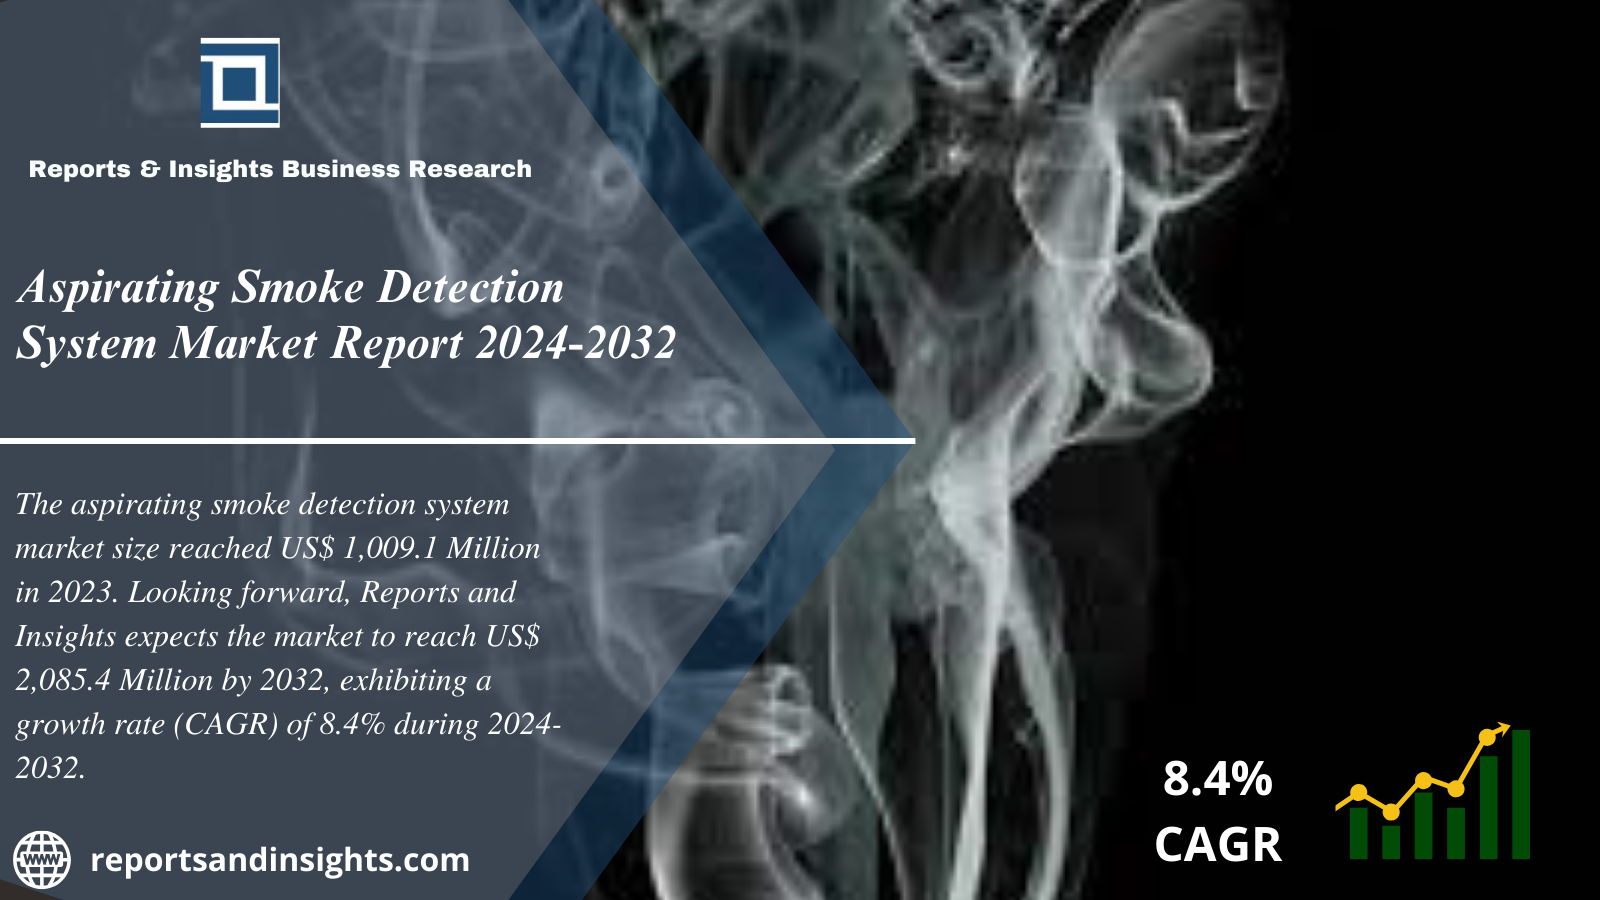 Aspirating Smoke Detection System Market 2024 to 2032; Industry Share, Trends, Latest Developments, Size, Growth, Opportunities and Competitive Outlook